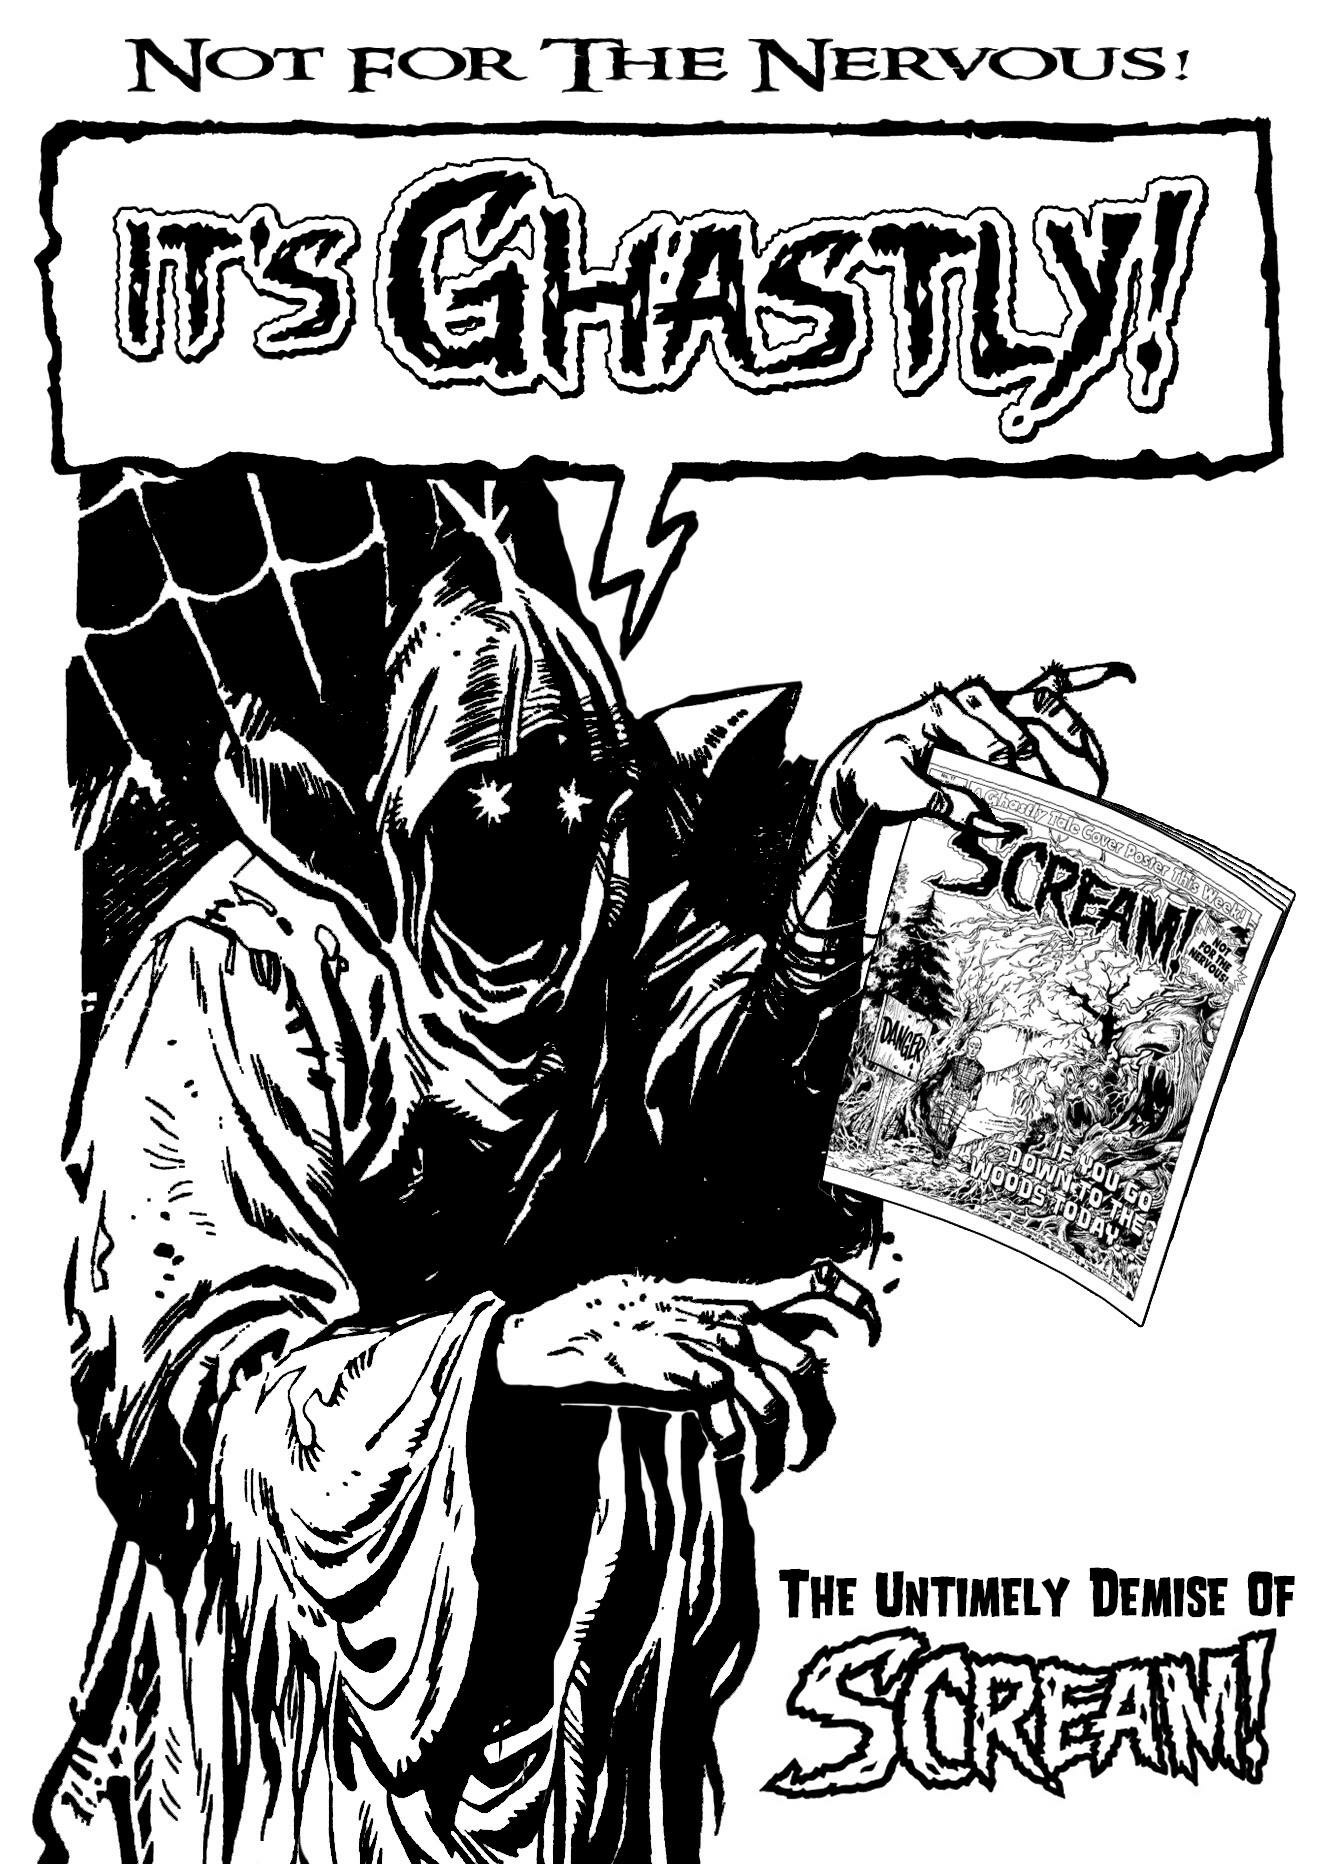 It's Ghastly! - Cover